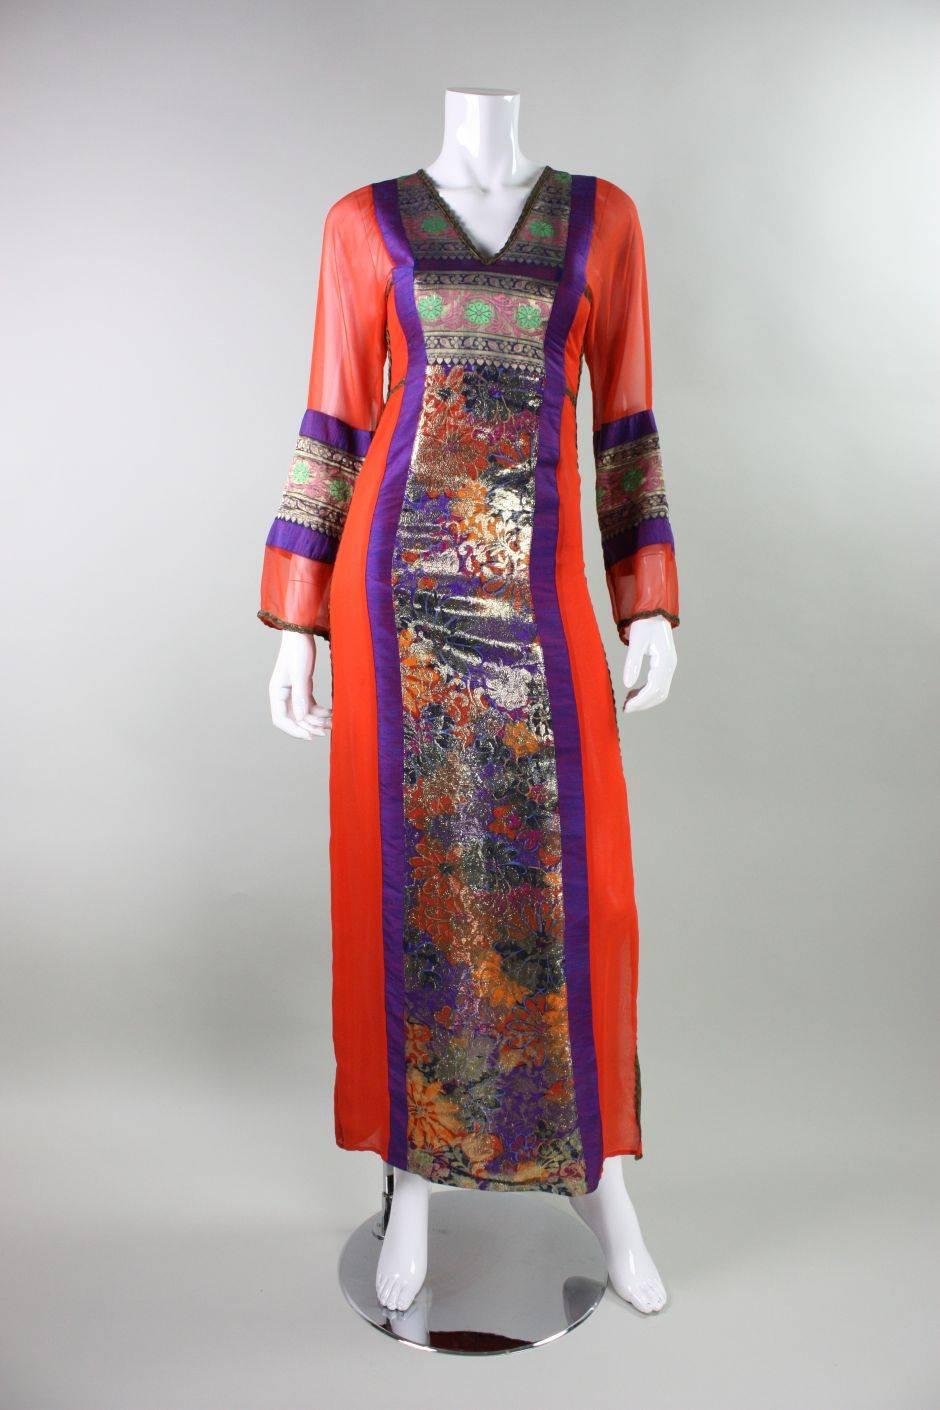 Vintage gown from English designer Thea Porter dates to the 1970's and retailed at Giorgio Beverly Hills.  It is made of a variety of fabrics including an orange silk chiffon, purple/blue silk shantung, and ethnic metallic jacquard.  V-neck and